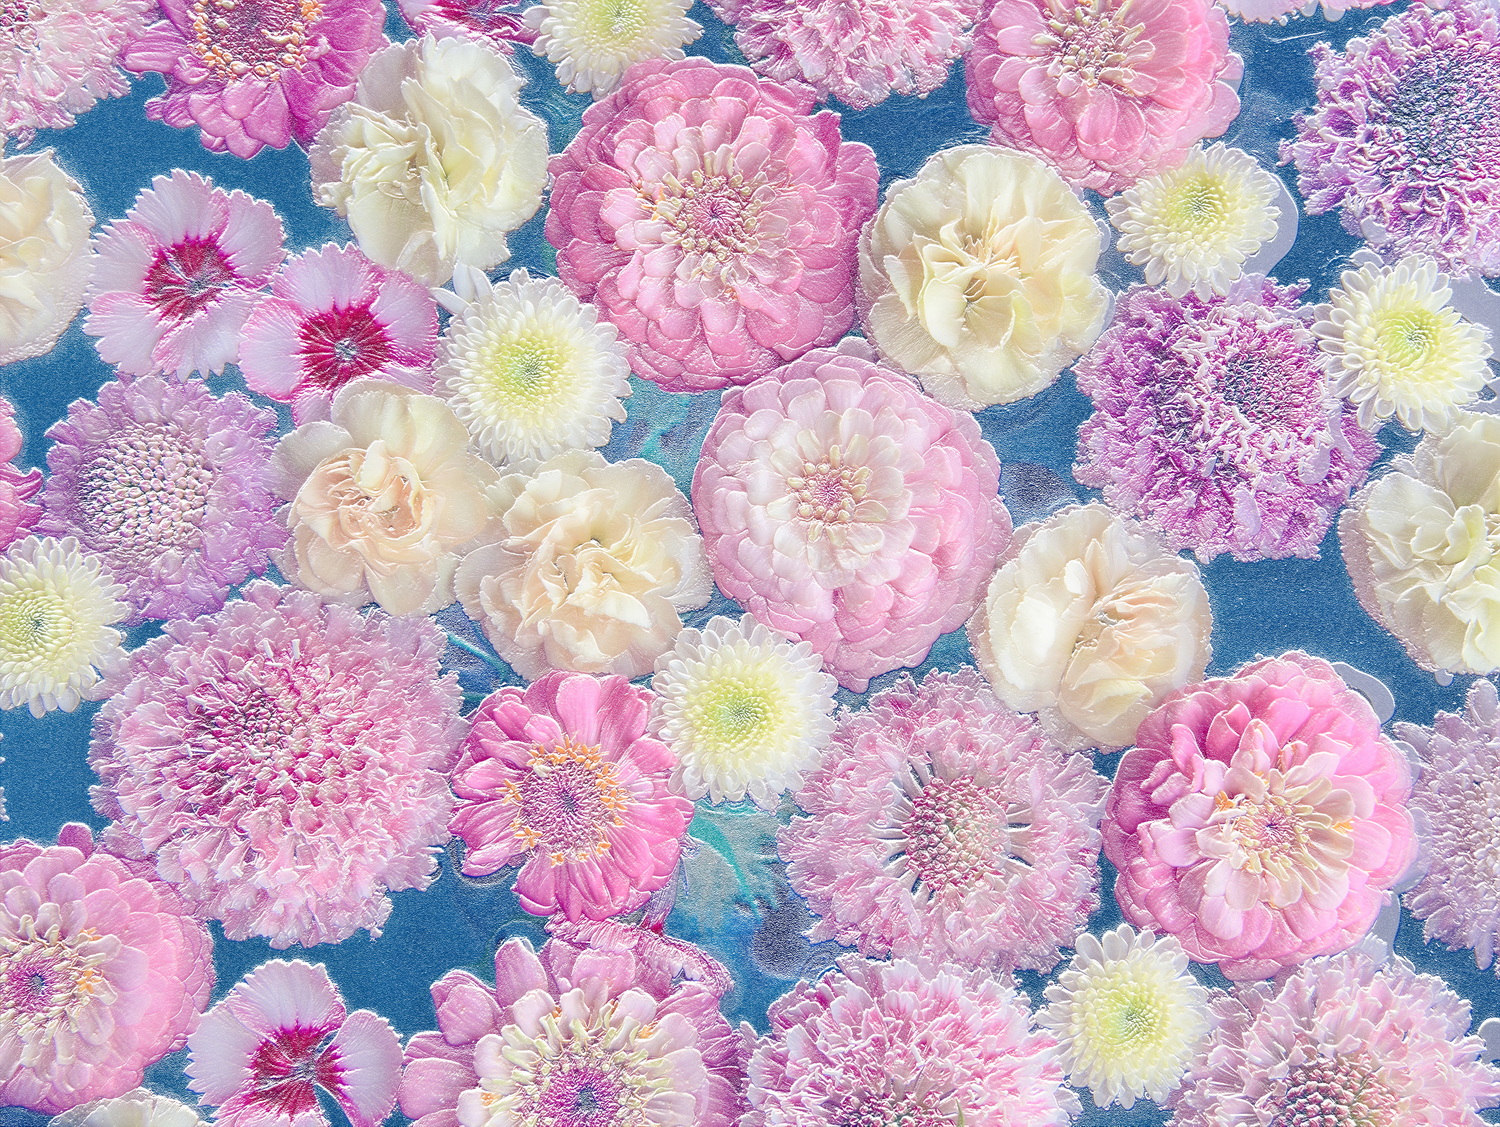 Relief_of_white_and_pink_flowers_on_blue_background_109